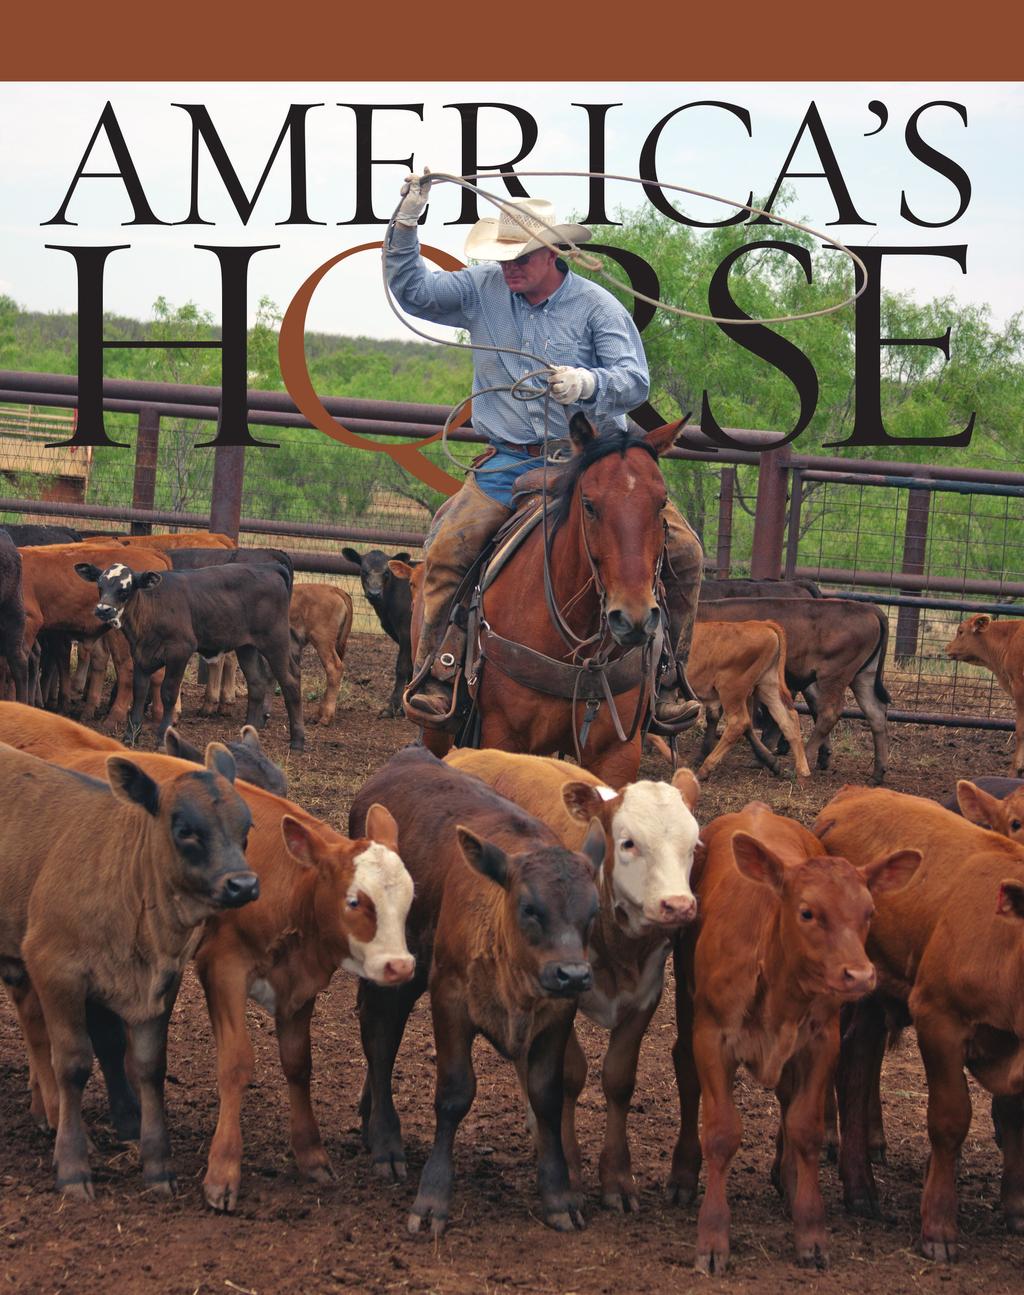 Used by permission of America s Horse from the November 2013 edition.